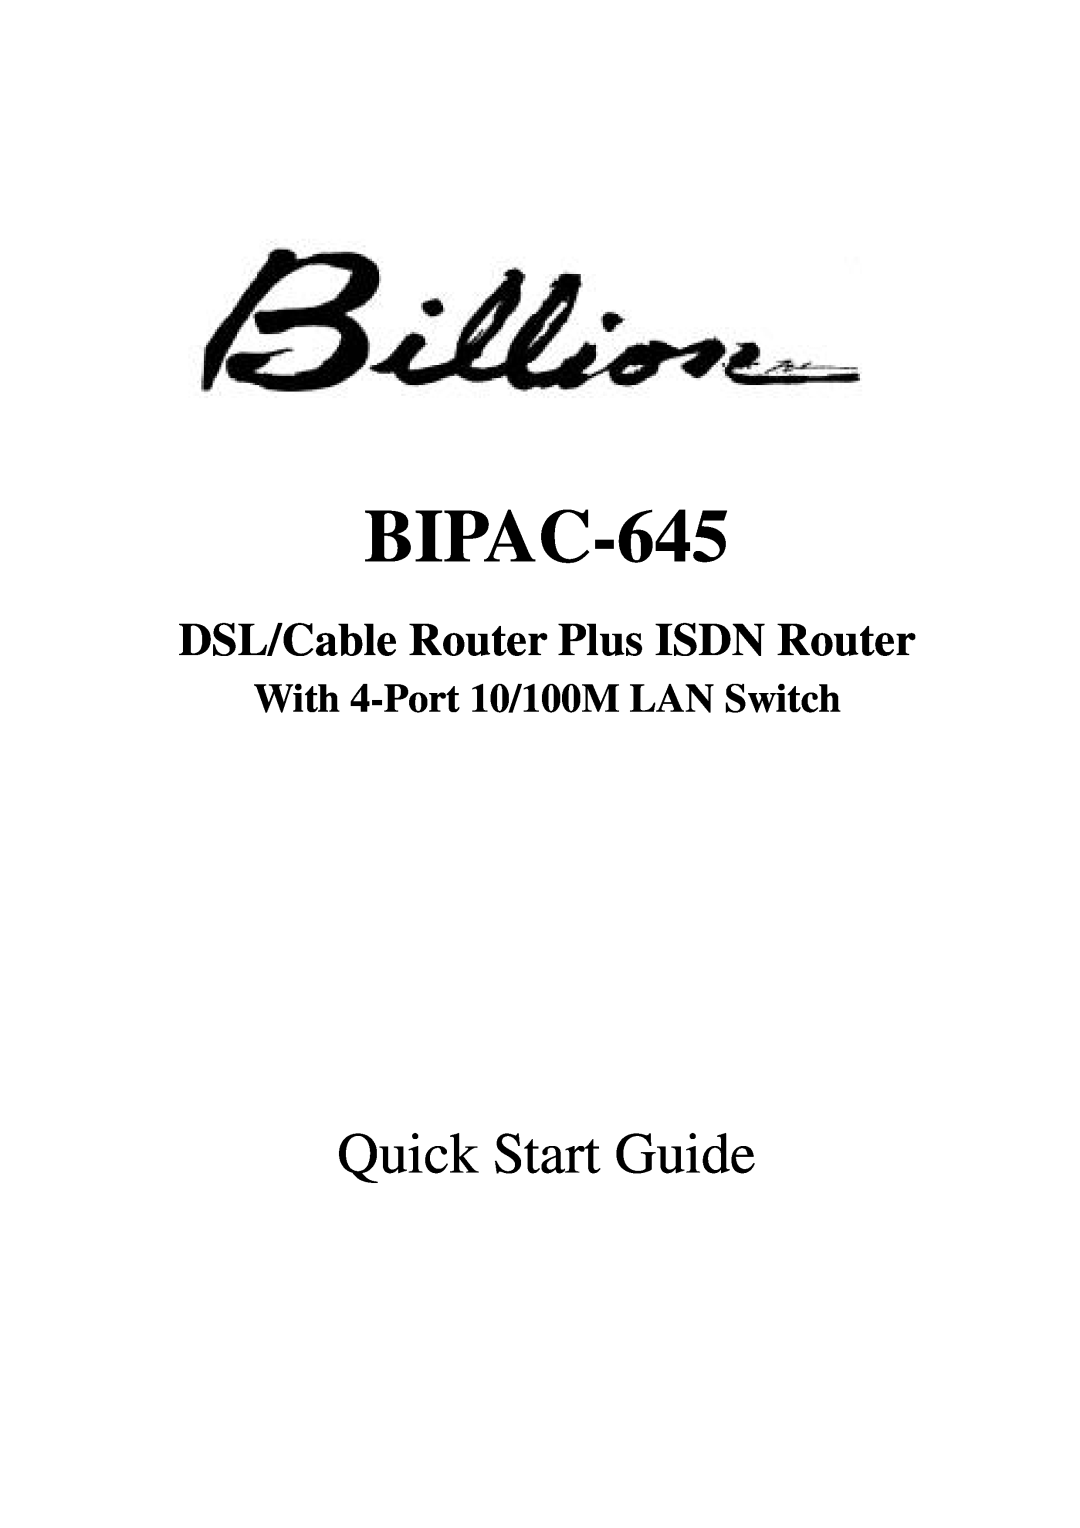 Billion Electric Company BIPAC-645 quick start DSL/Cable Router Plus ISDN Router, Quick Start Guide 